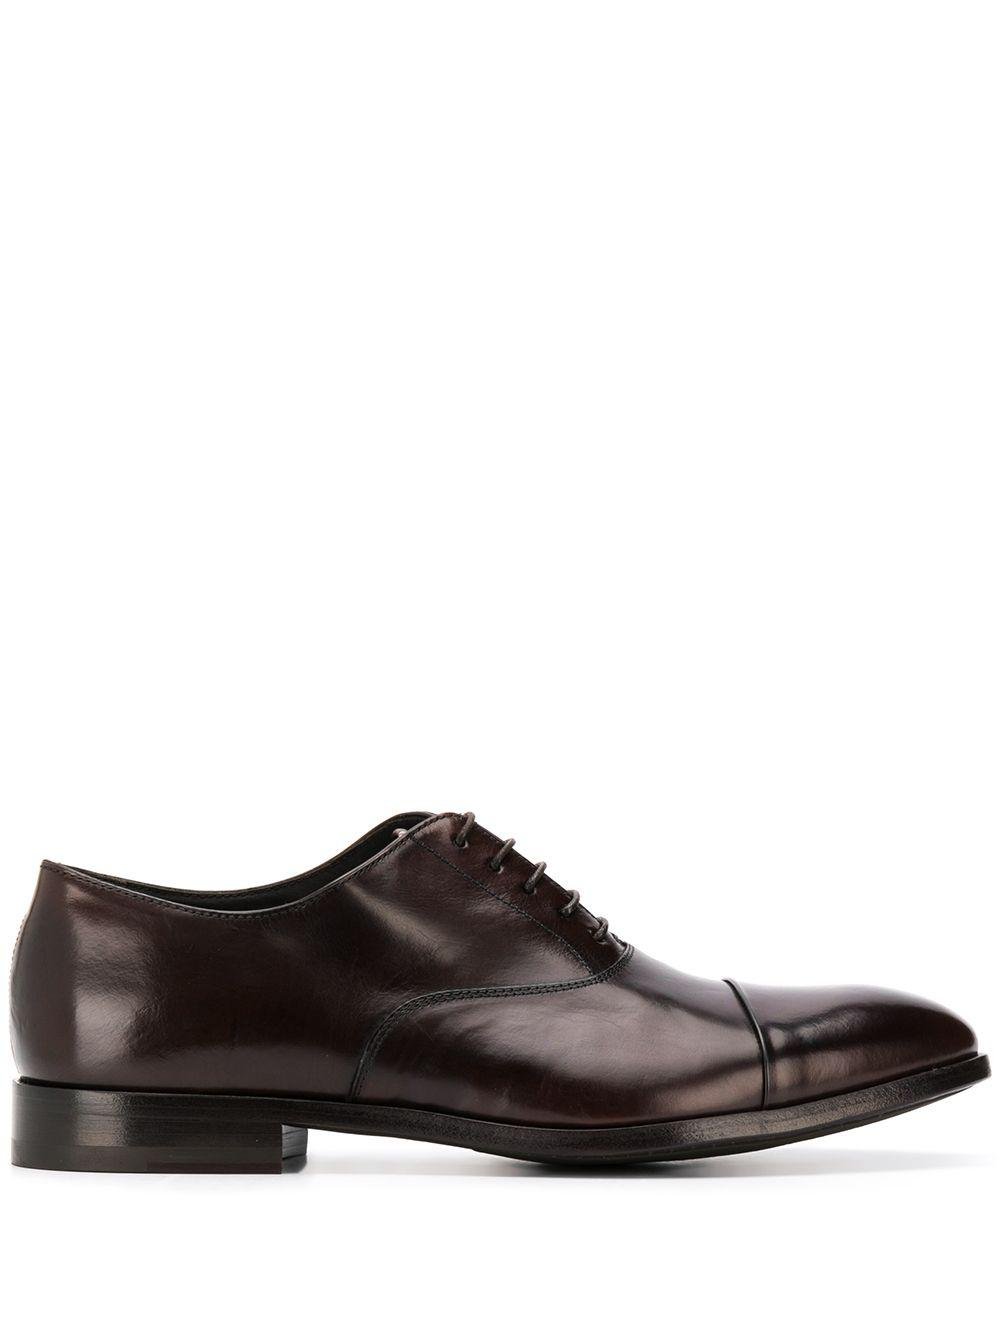 lace-up oxford shoes by PAUL SMITH